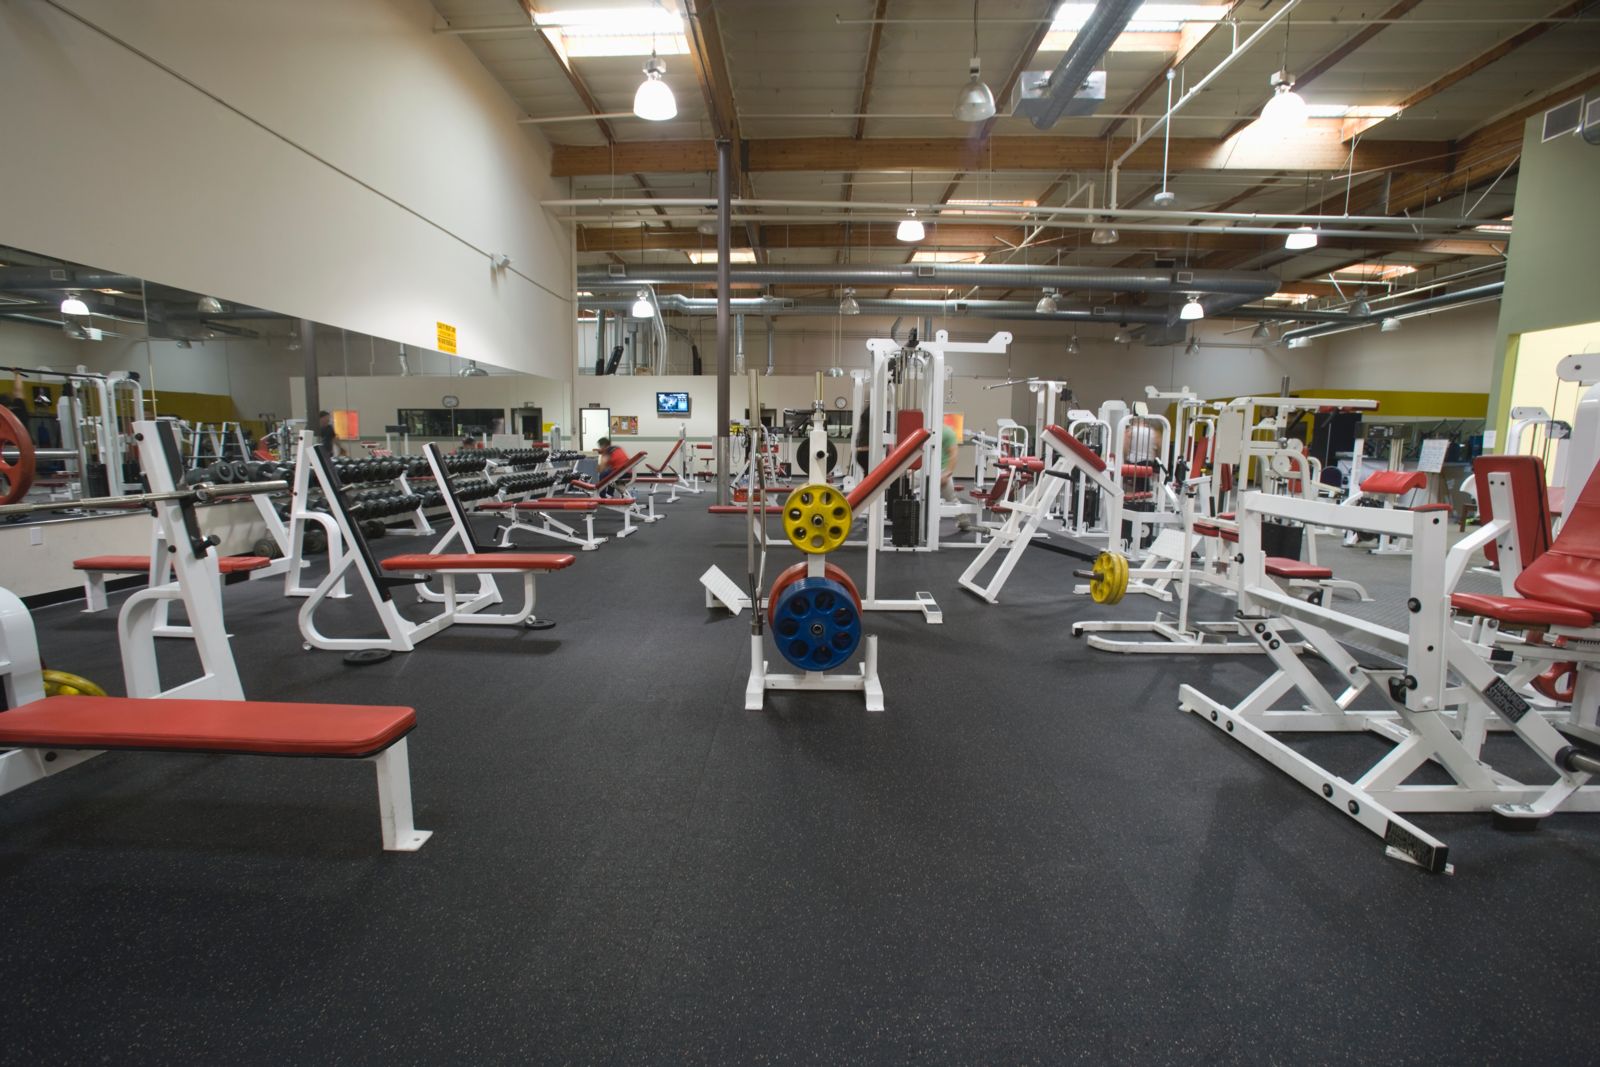 FitFloors® - Rubber Gym Flooring & Fitness Mats - Made in the USA